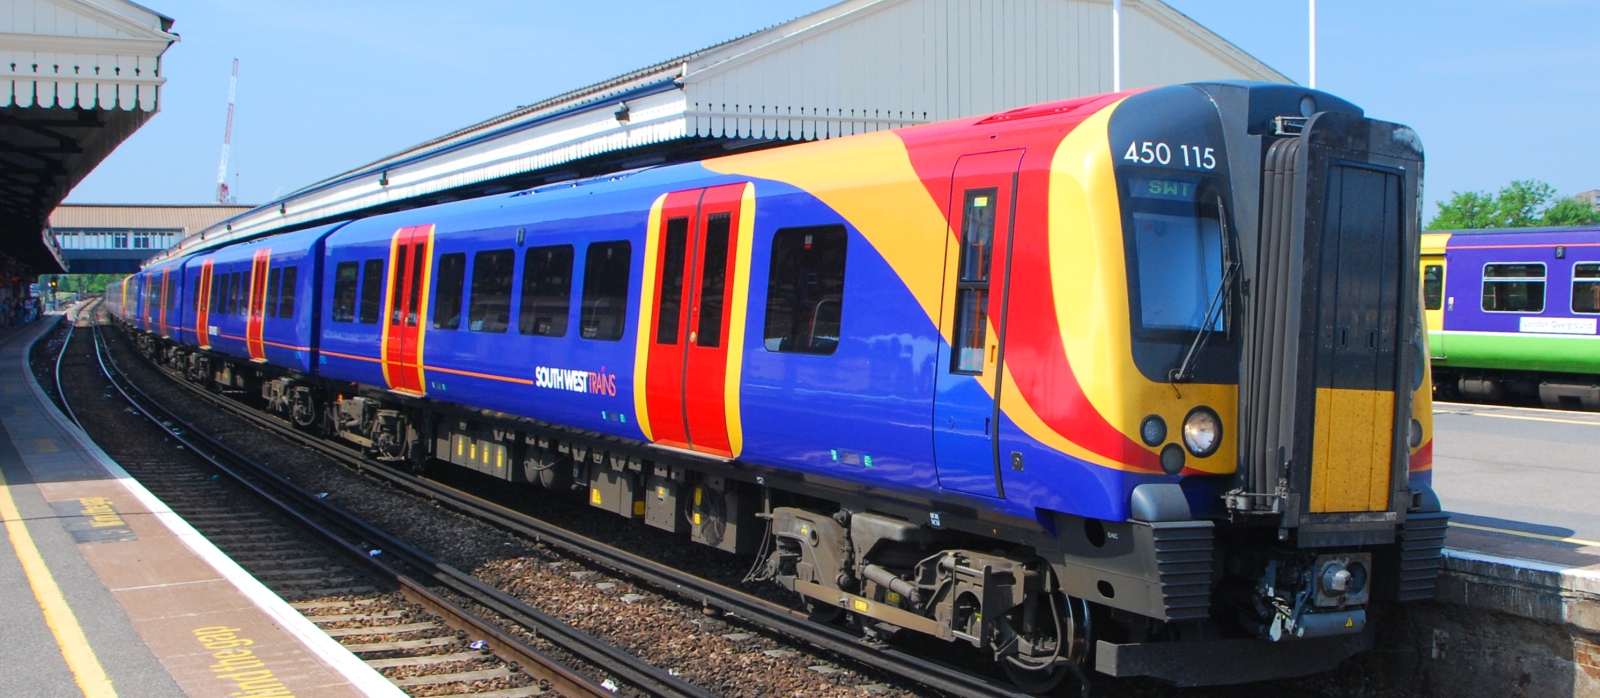 South West Trains 450/1 at Clapham Junction station in London